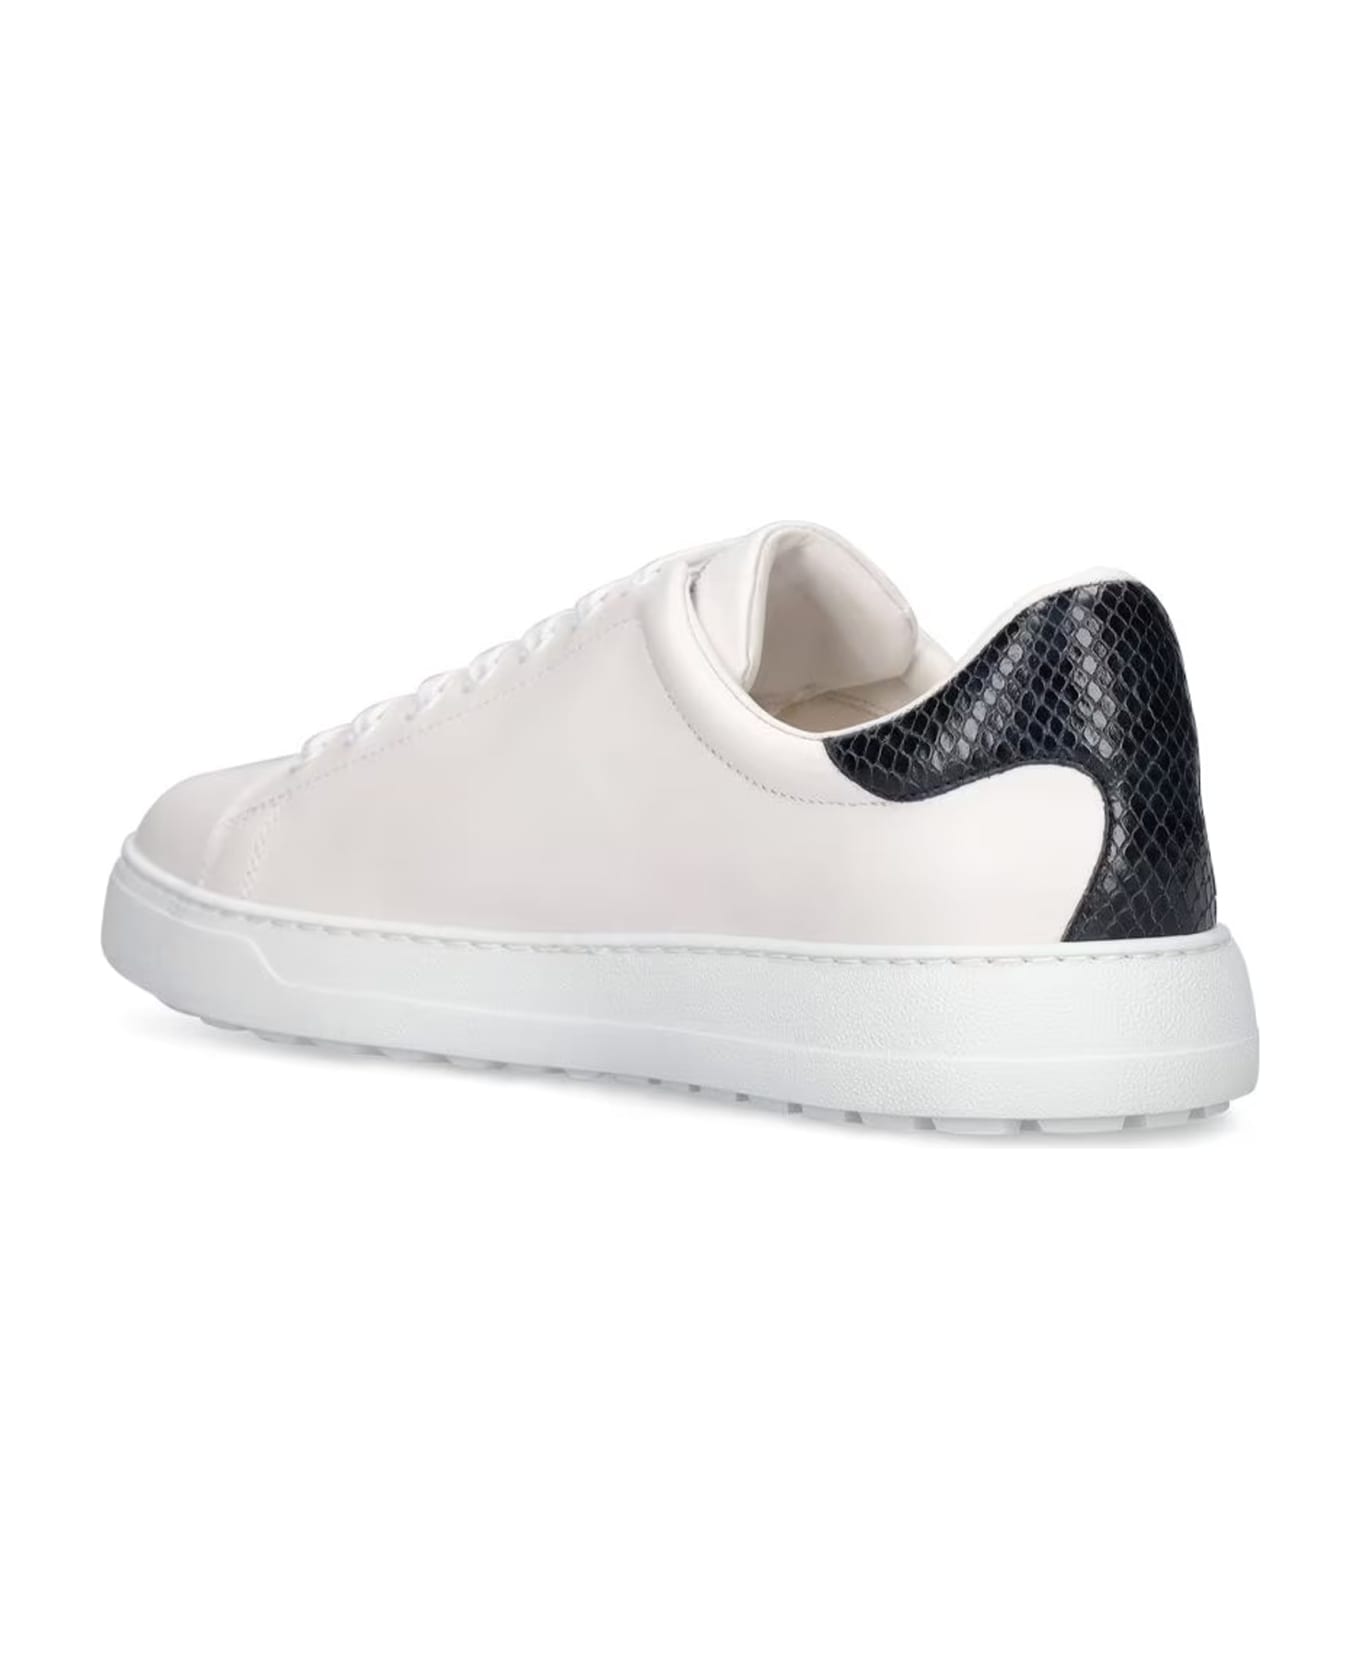 Ferragamo Number Leather Sneakers - White